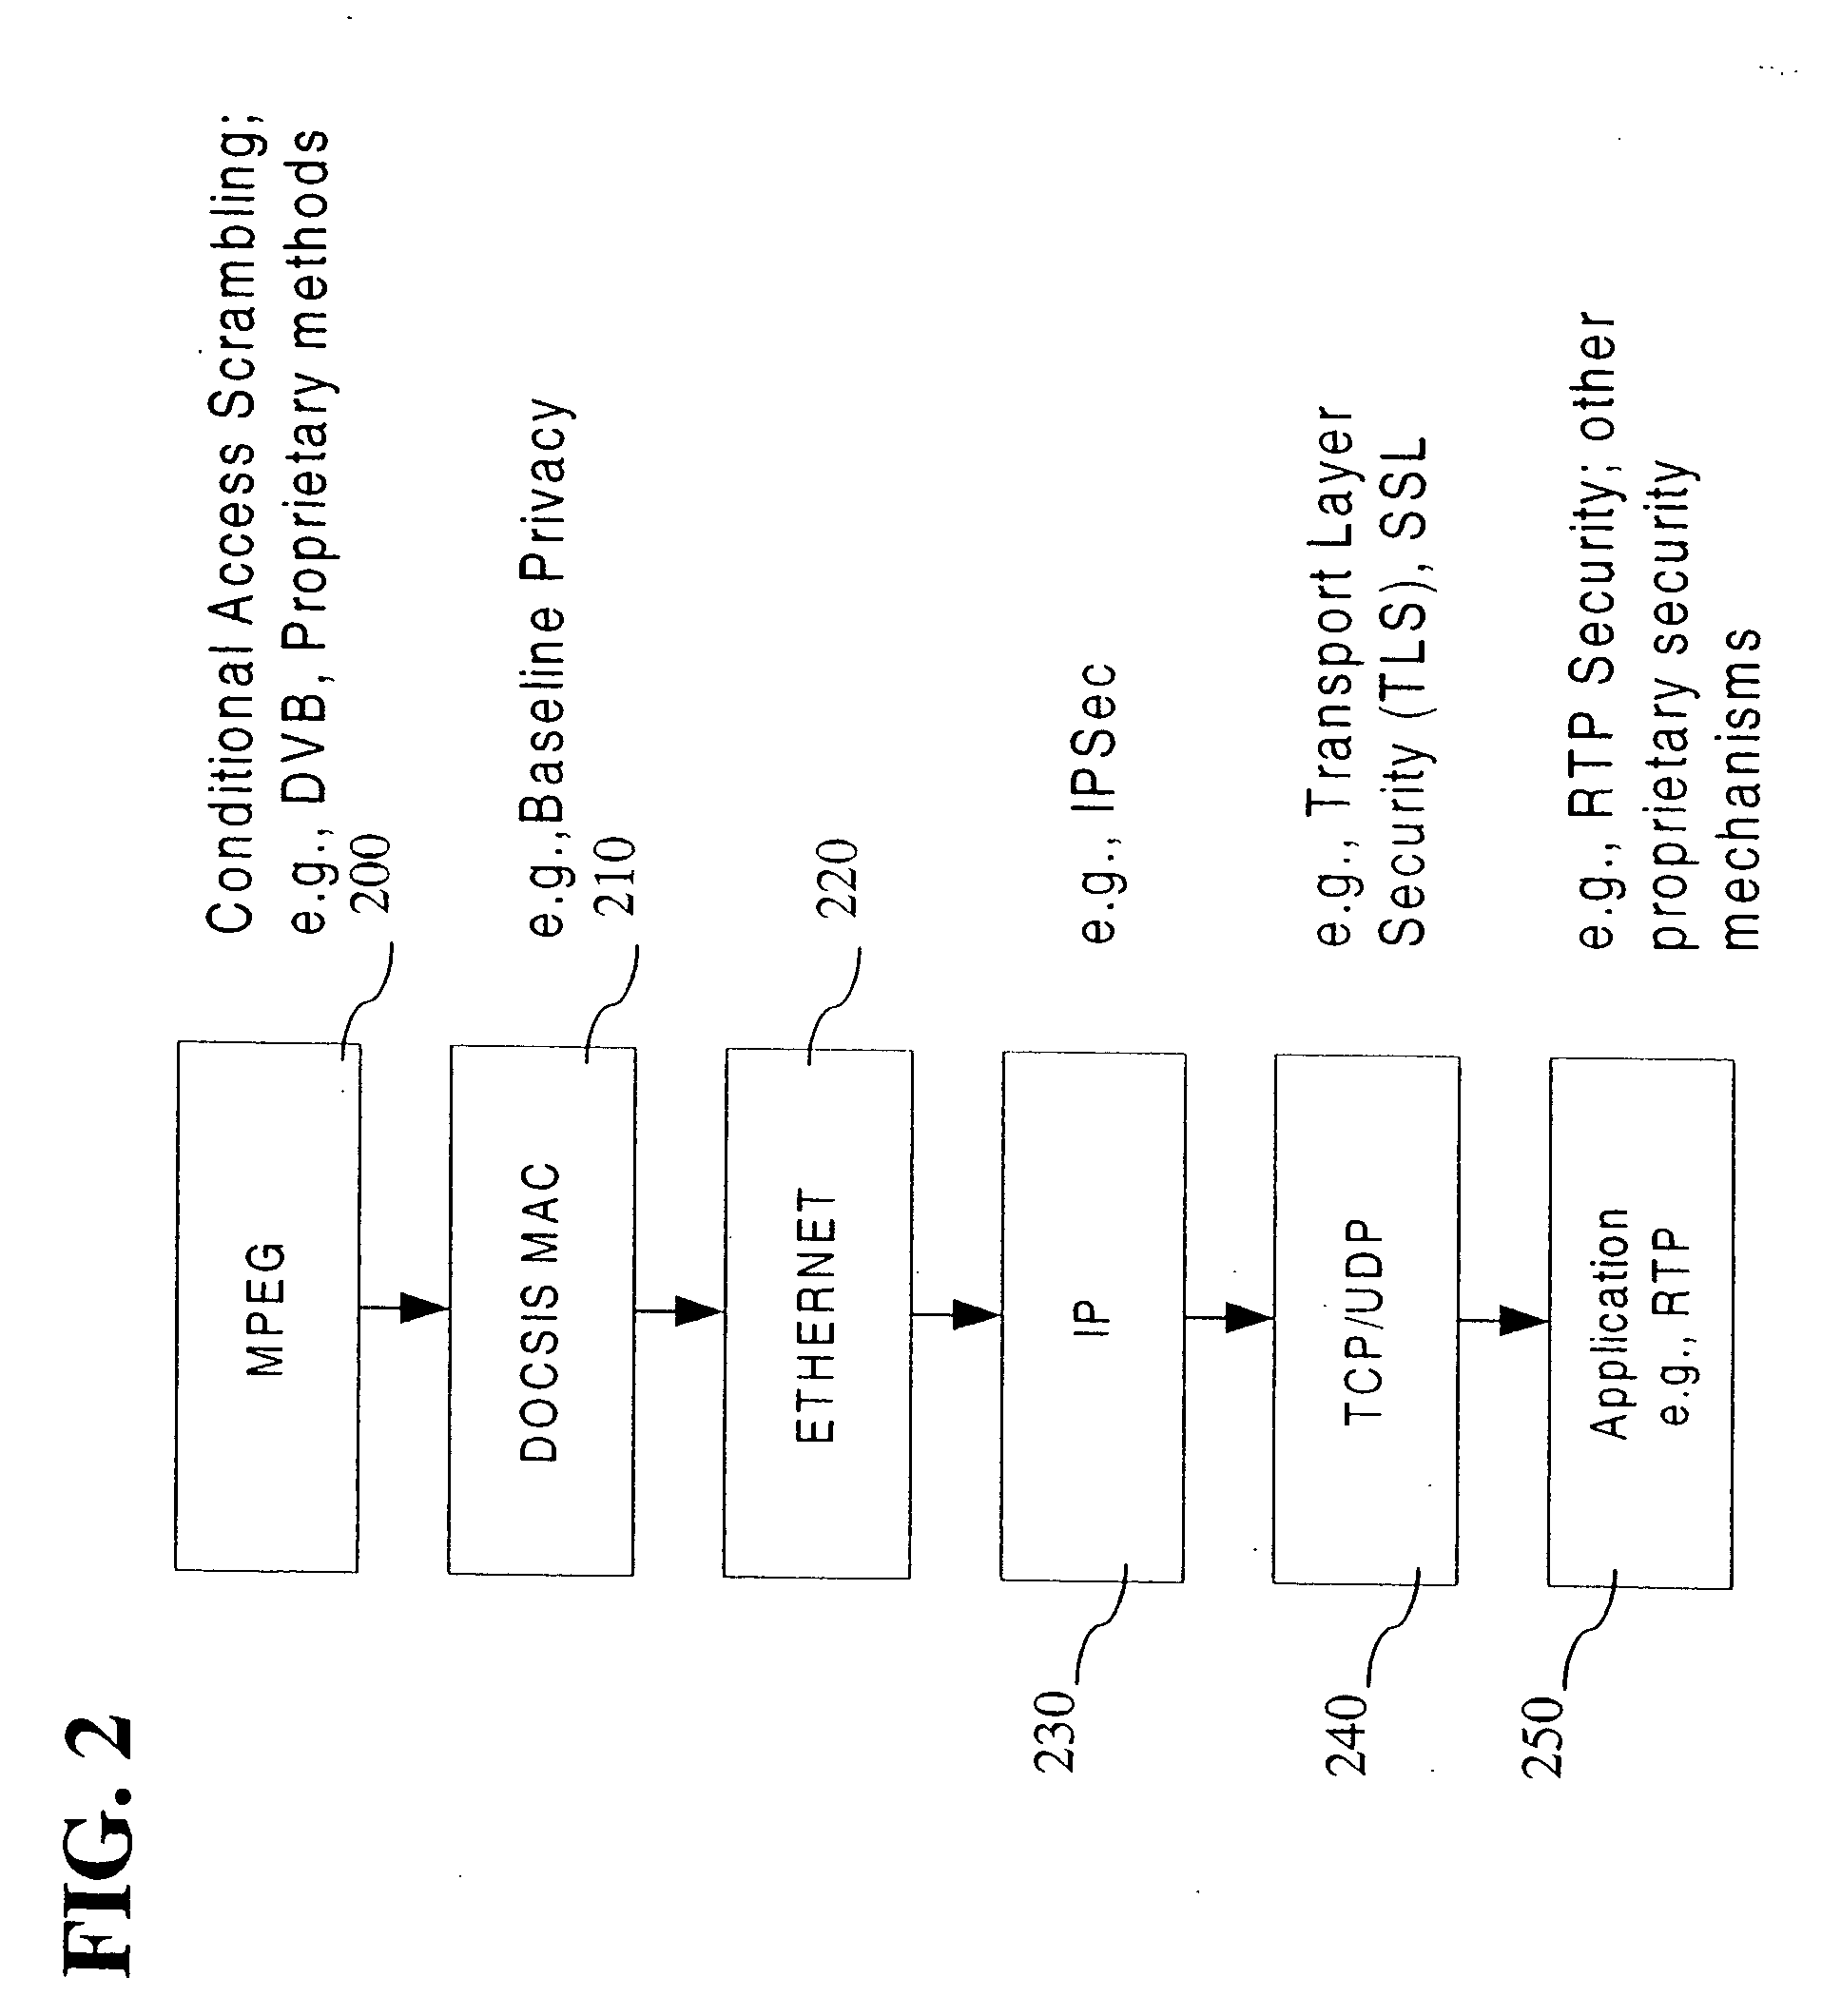 Method for processing multiple wireless communications security policies